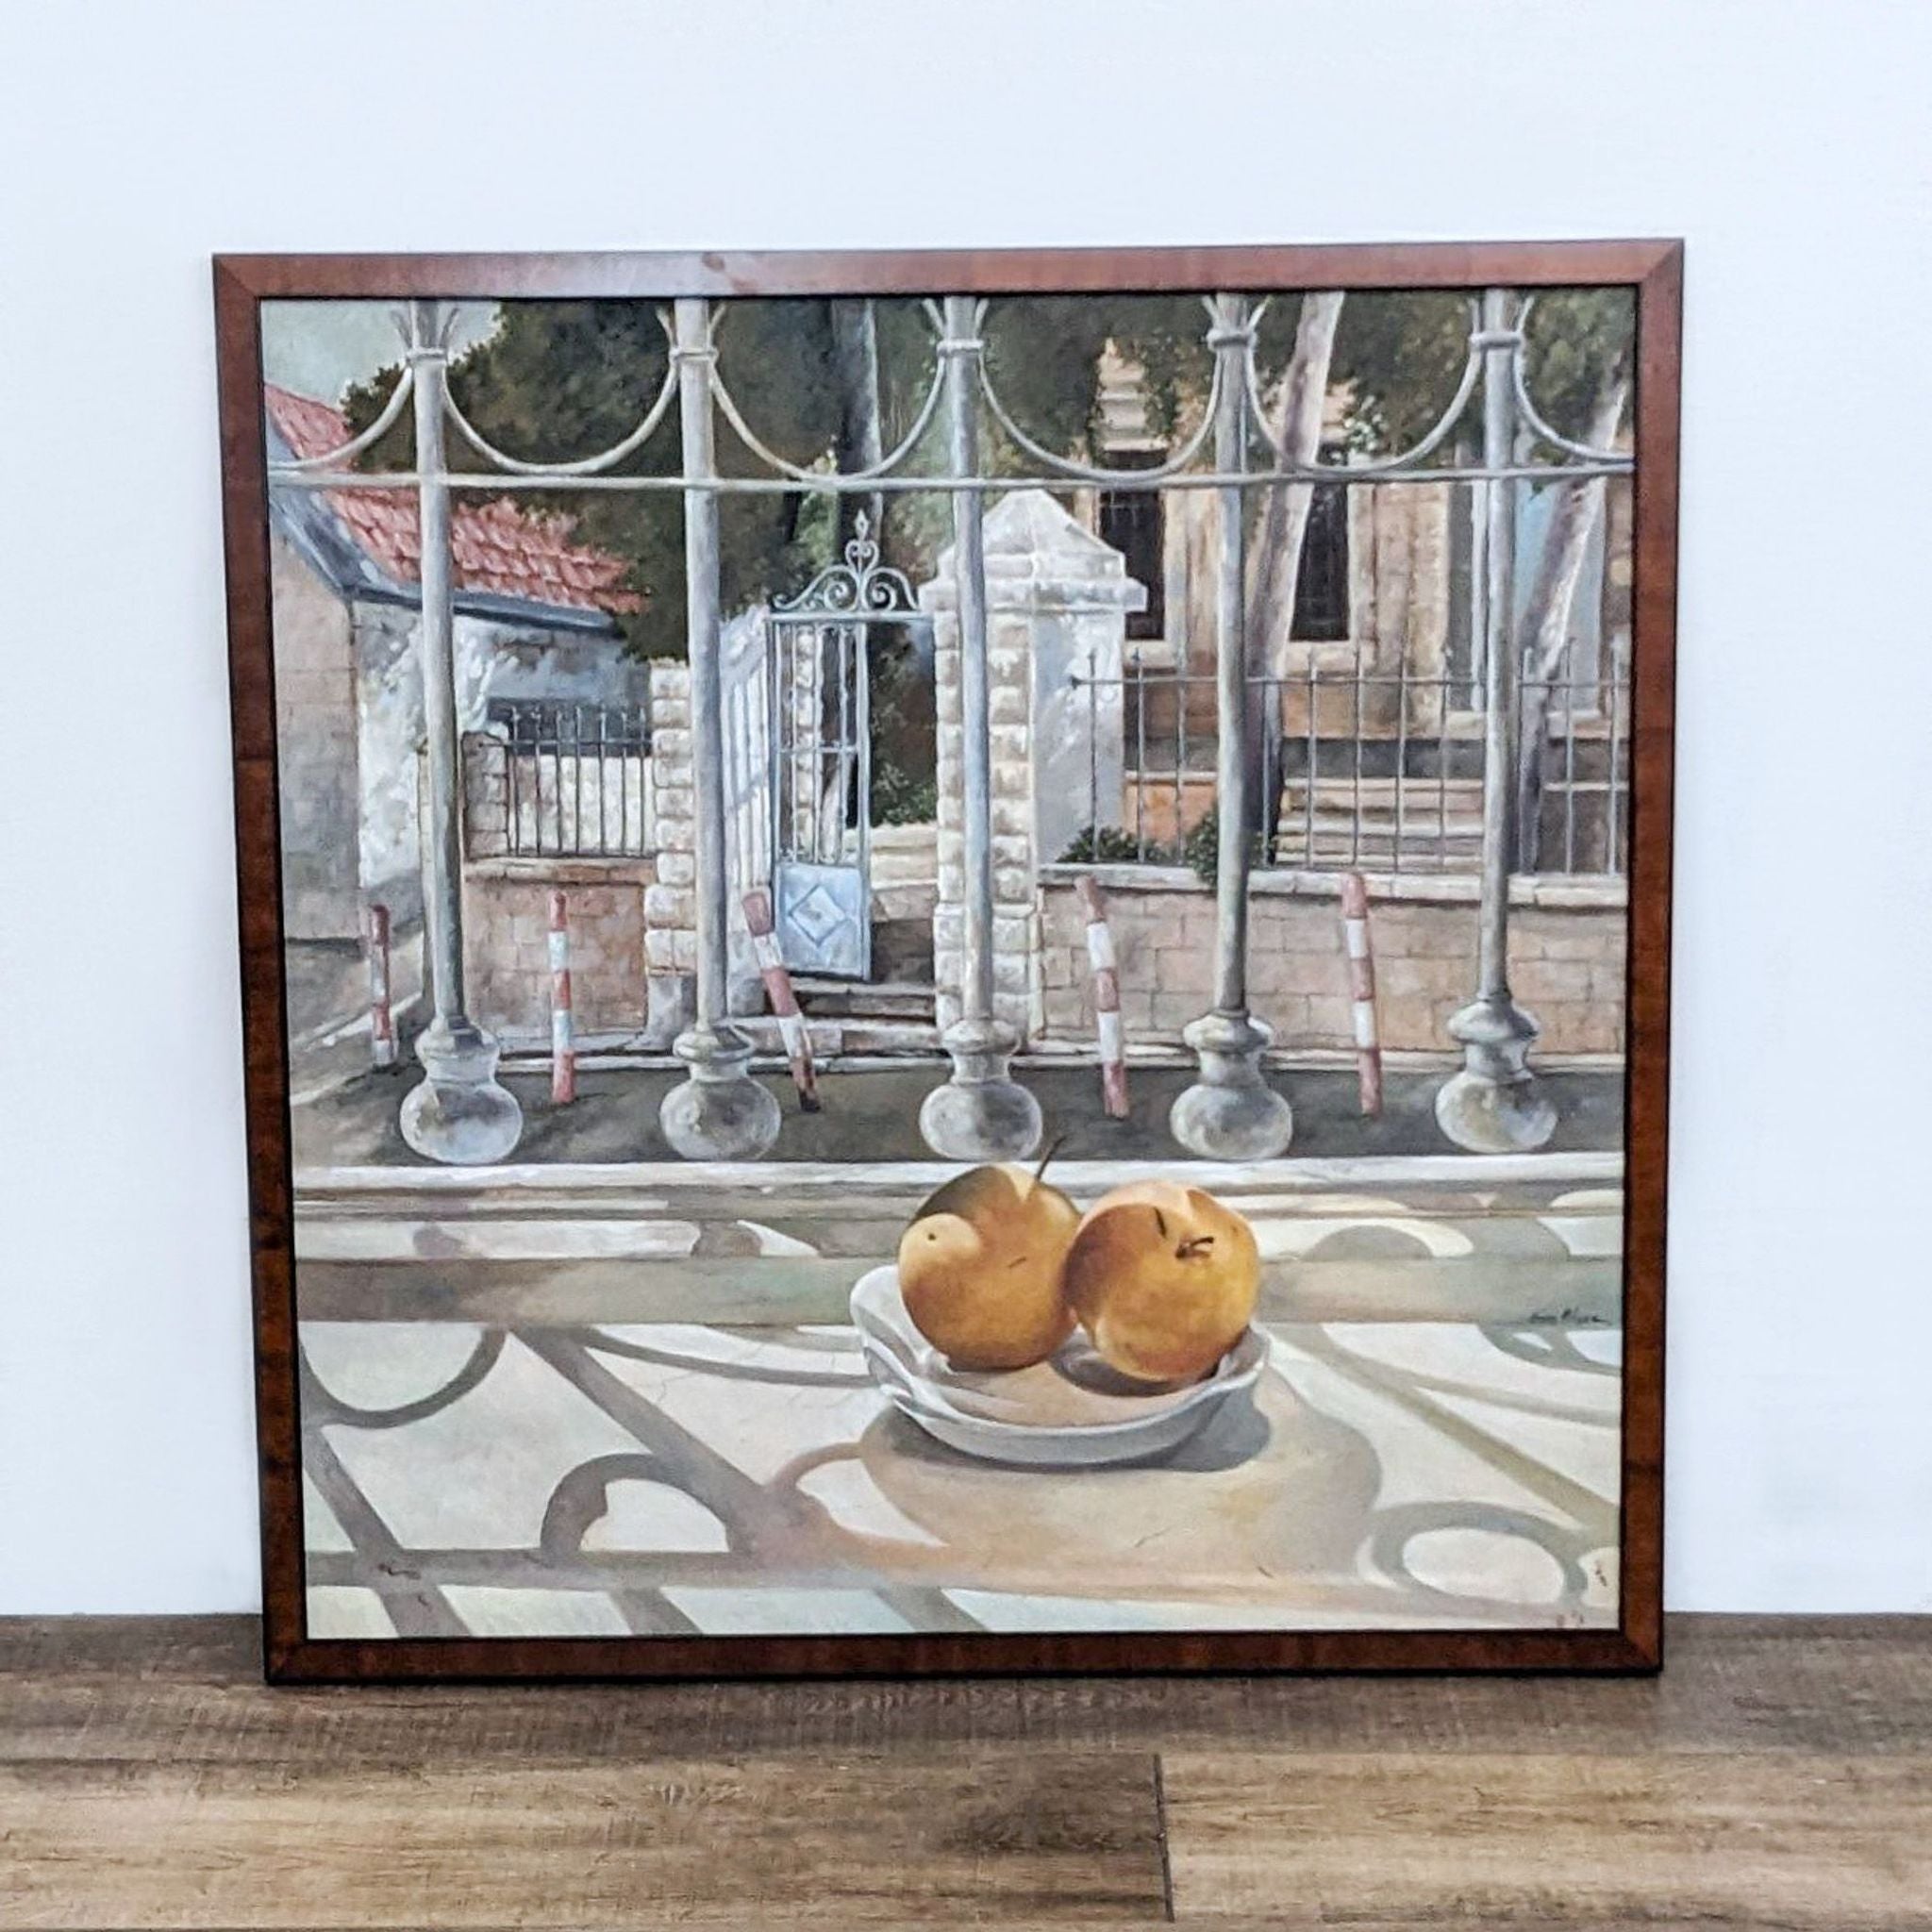 Painting of peaches on a windowsill with a street view background, by Hanan Milner.